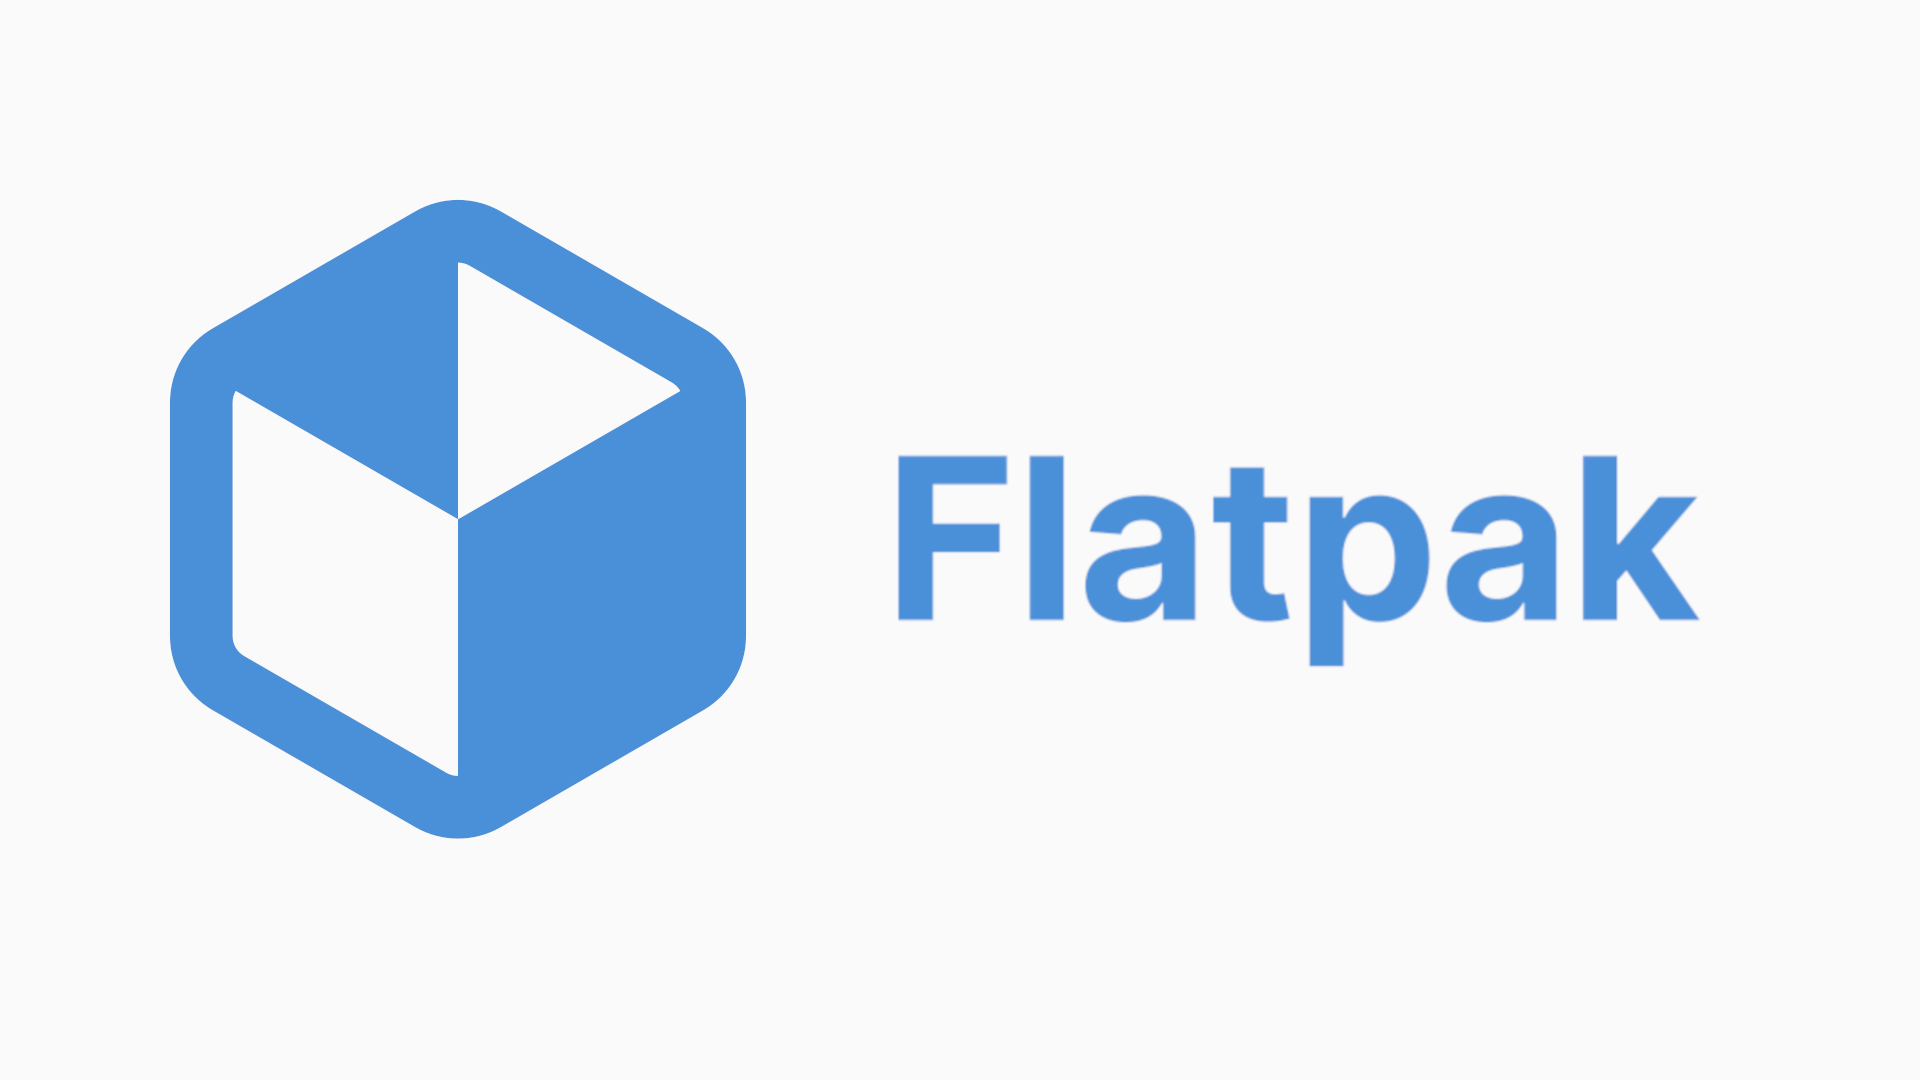 What Is a Flatpak in Linux, and How Do You Install One?